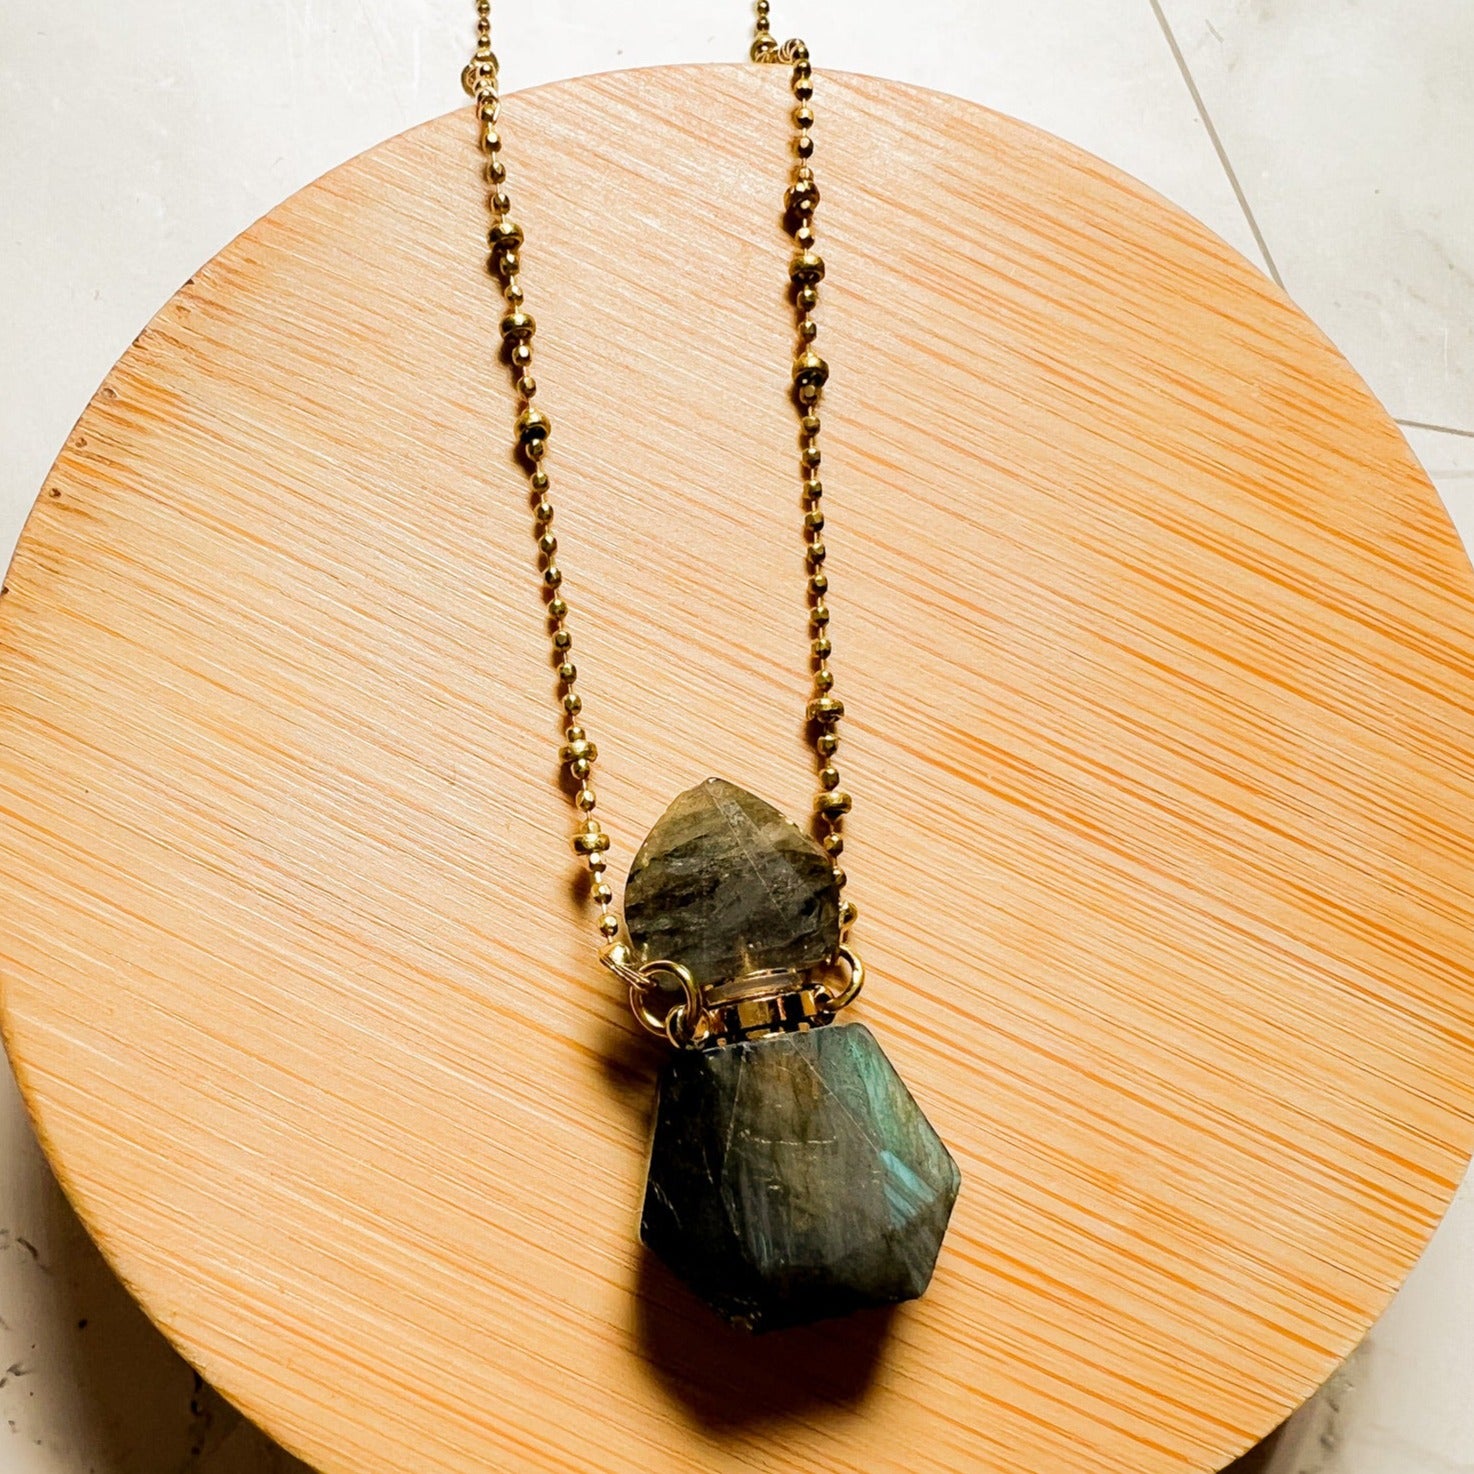 Jeanie : Small Bottle Necklace